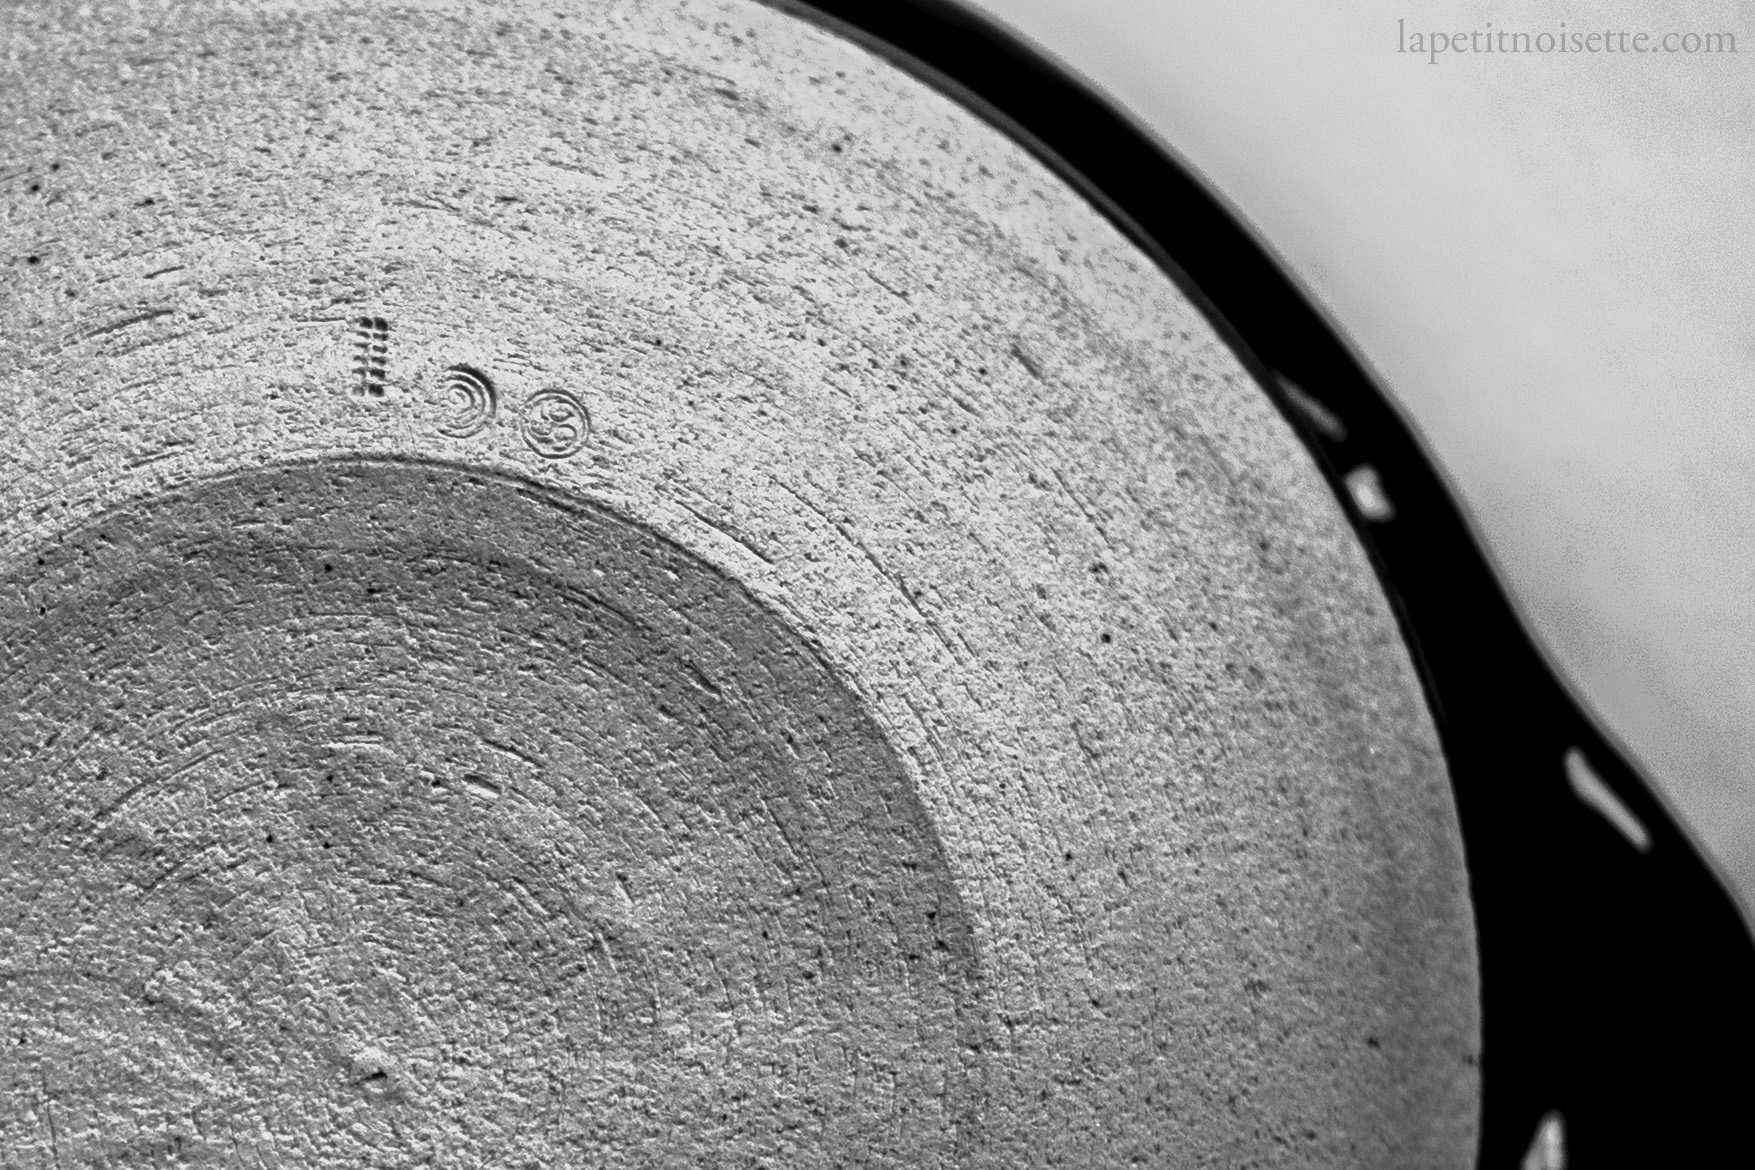 The logo of kobo kiln and Azmaya imprinted on the bottom of the their clay pot donabe.